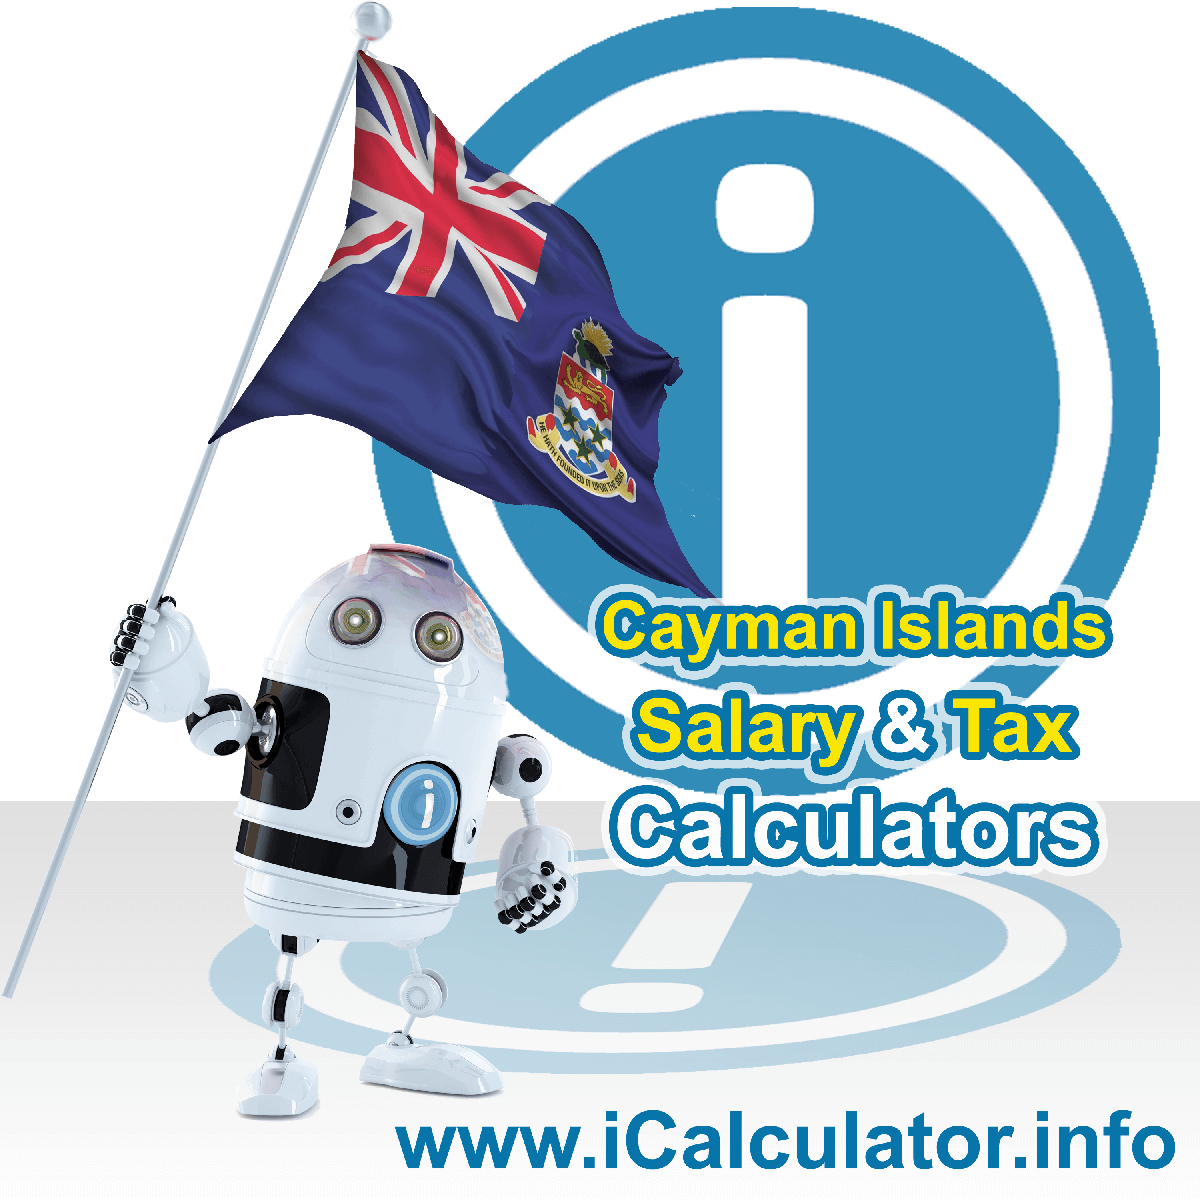 Cayman Islands Tax Calculator. This image shows the Cayman Islands flag and information relating to the tax formula for the Cayman Islands Salary Calculator